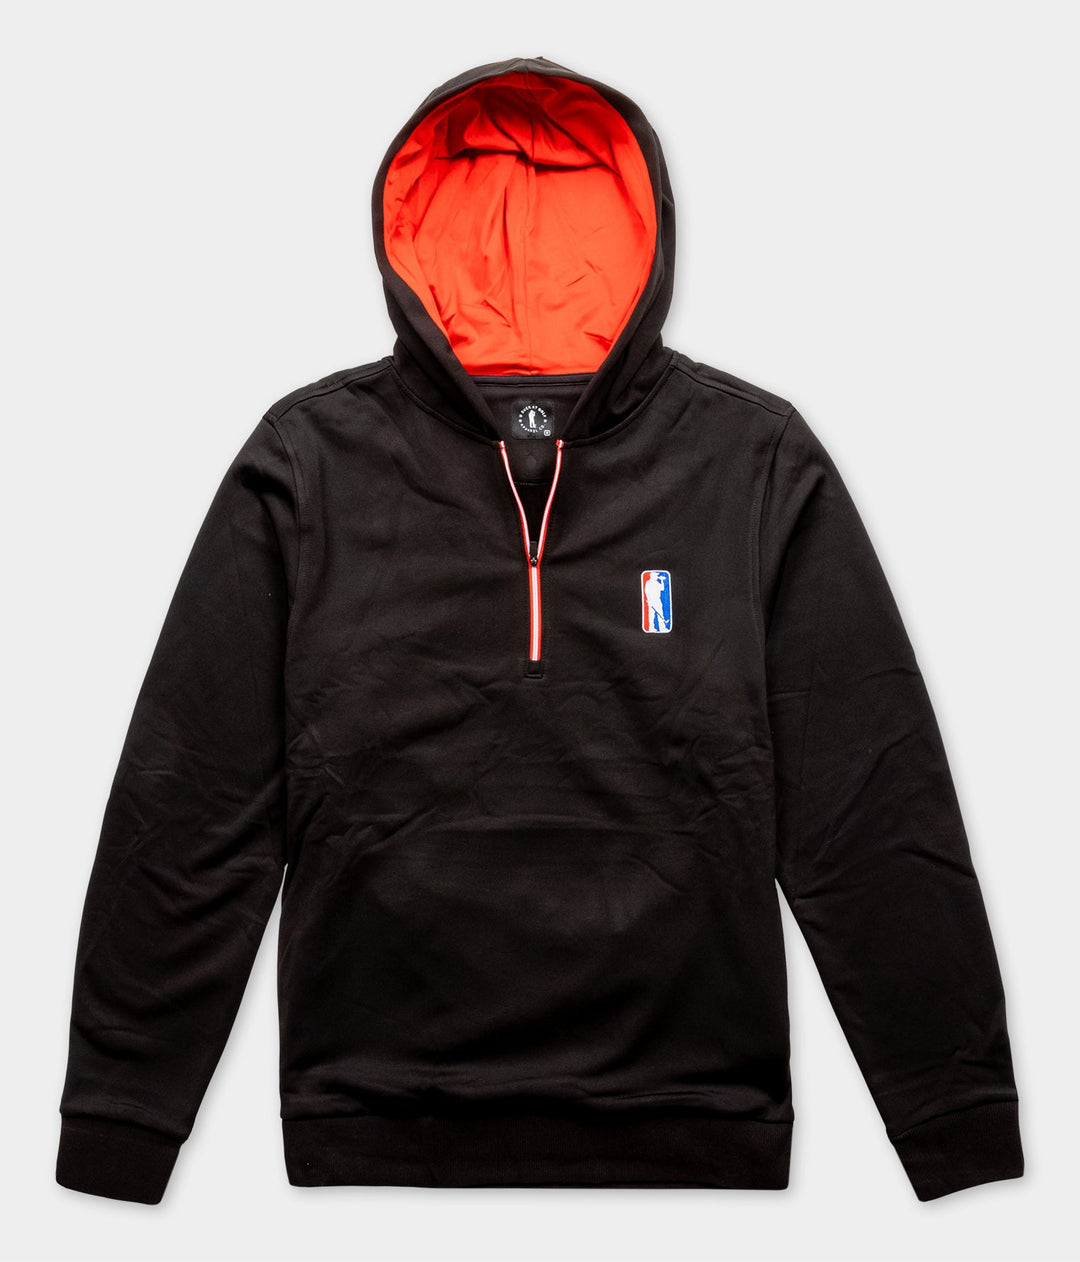 AGT On Course Hoodie